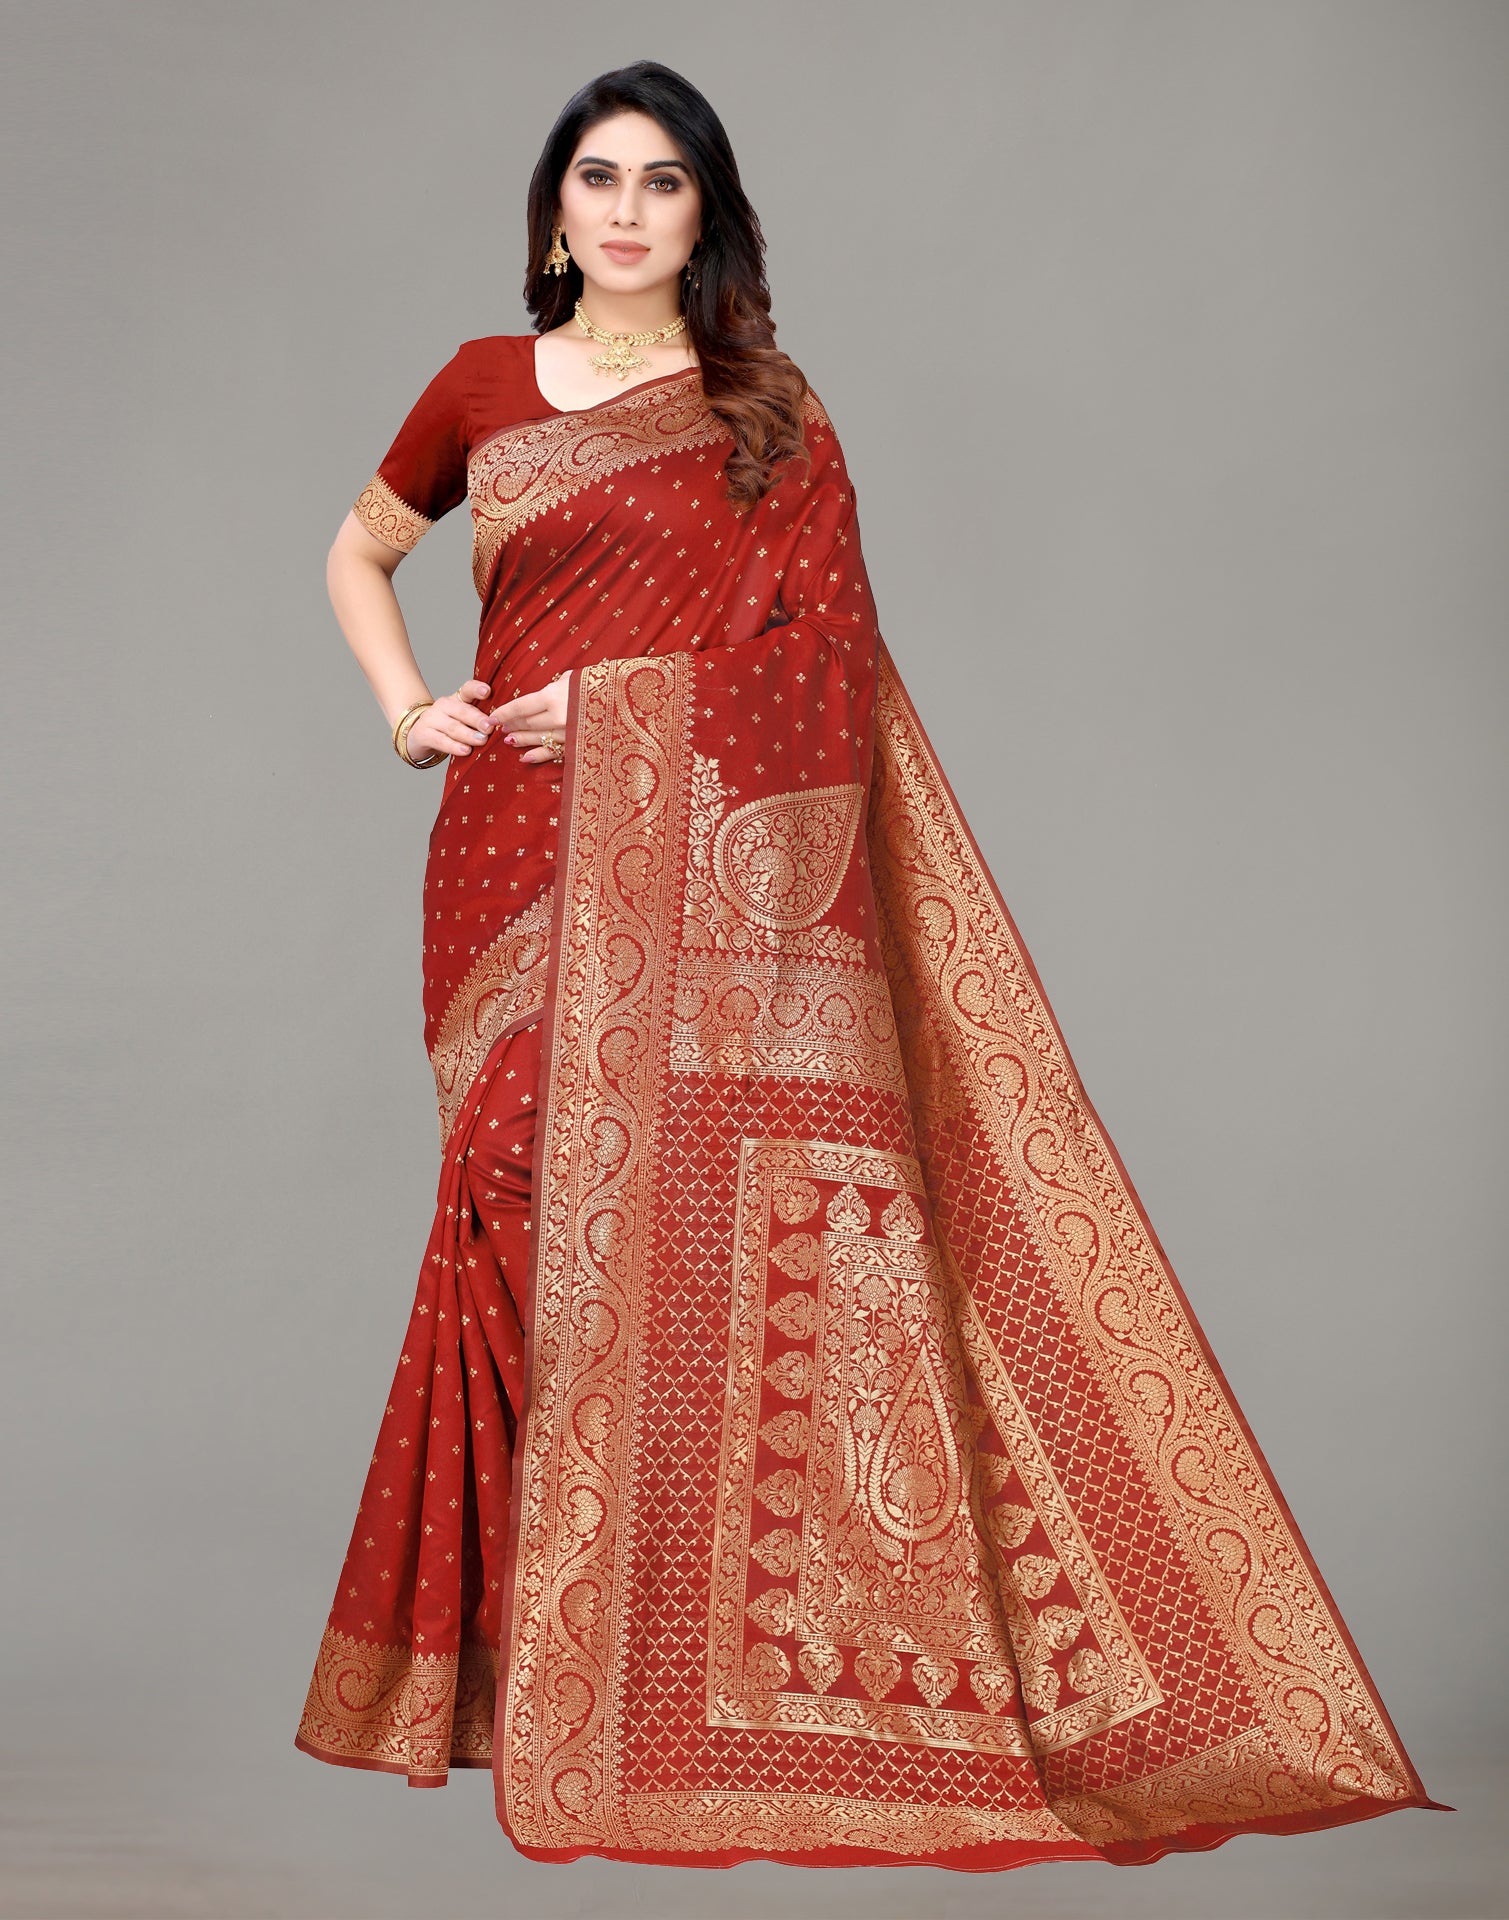 Red Golden Border Rangoli Silk Saree with Heavy Embroidery Blouse